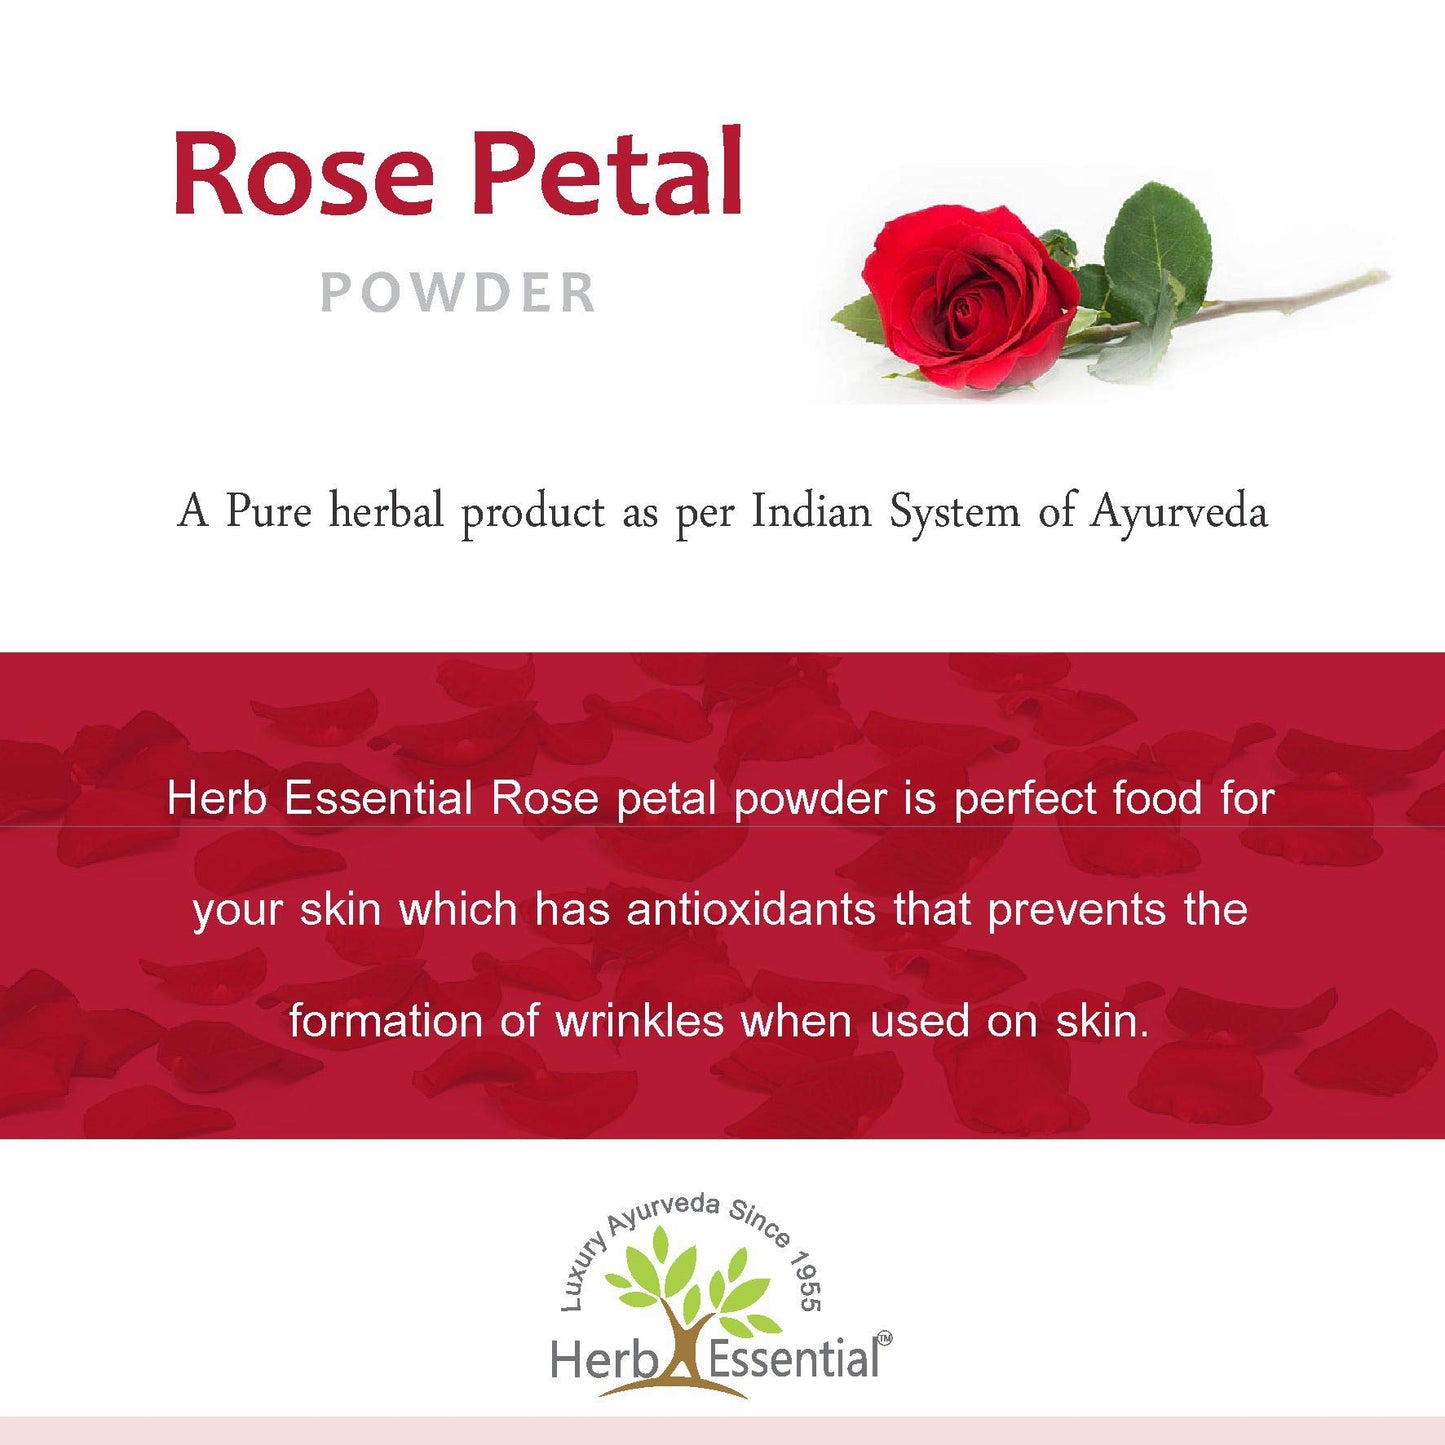 Herb Essential Rose Petal Powder for Face and Skin, 50g